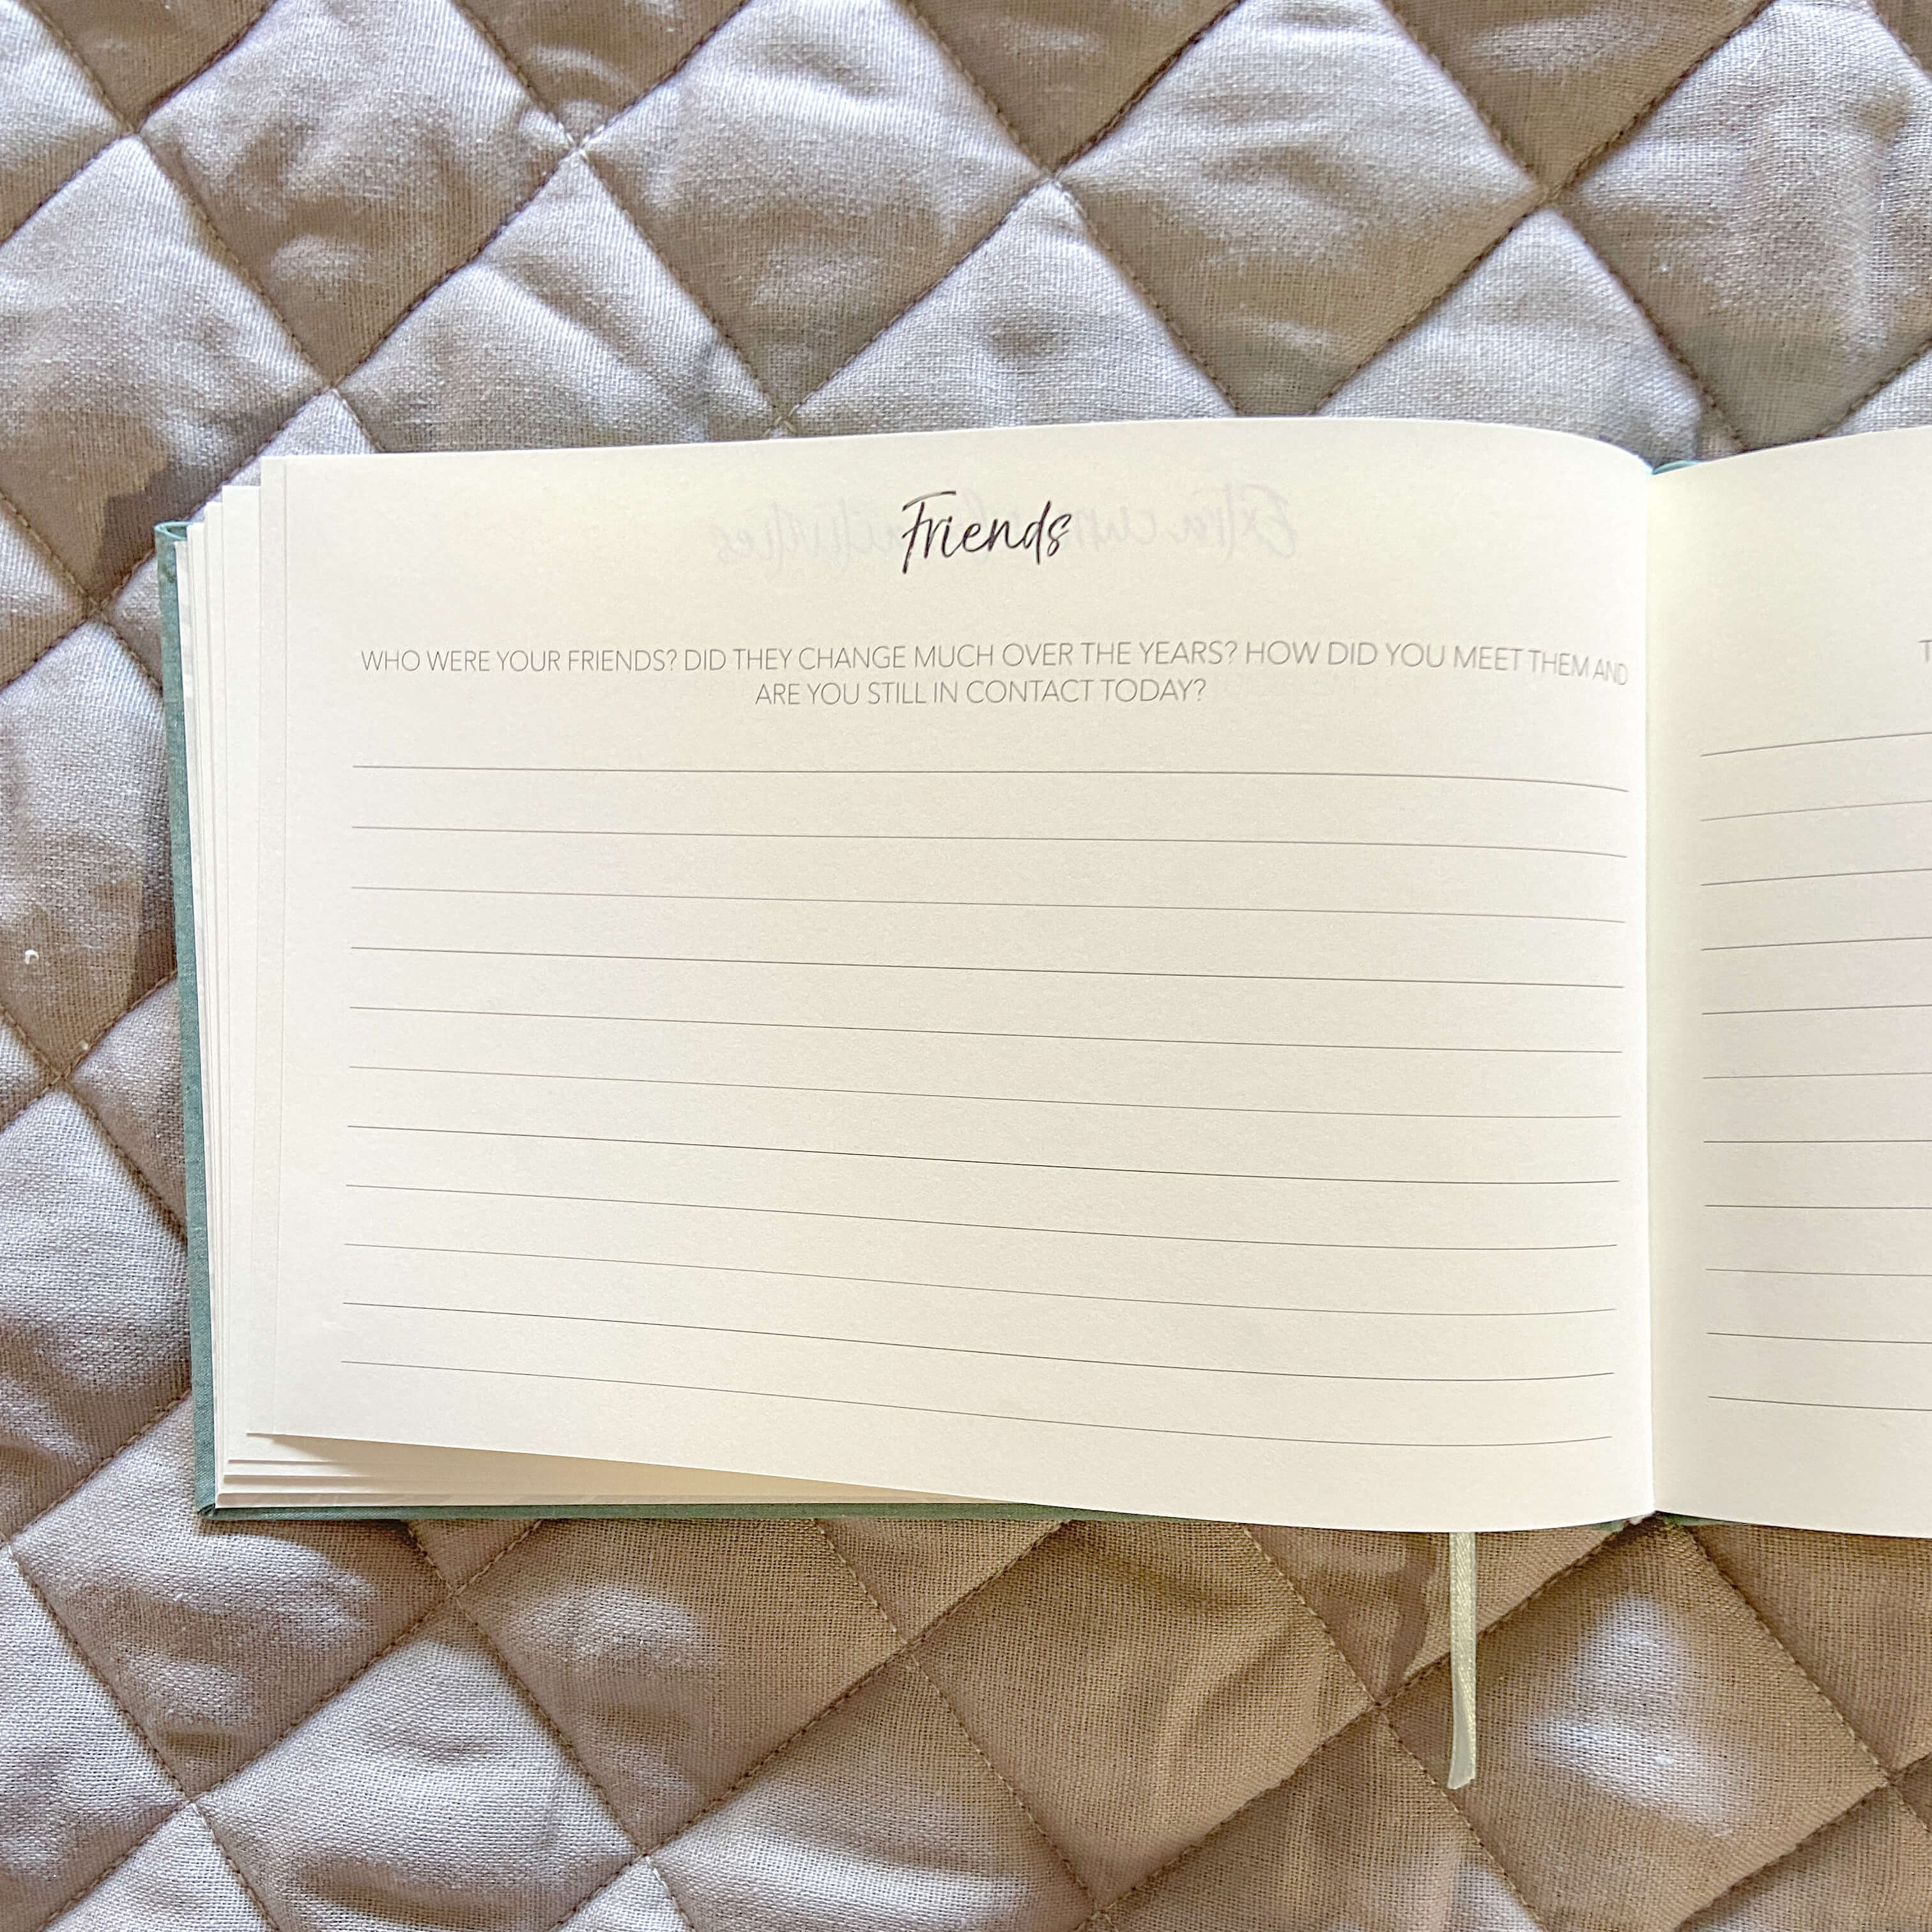 Buy 2 Luxe Journals Get 1 Free! (Plus a FREE Mum's Journal)